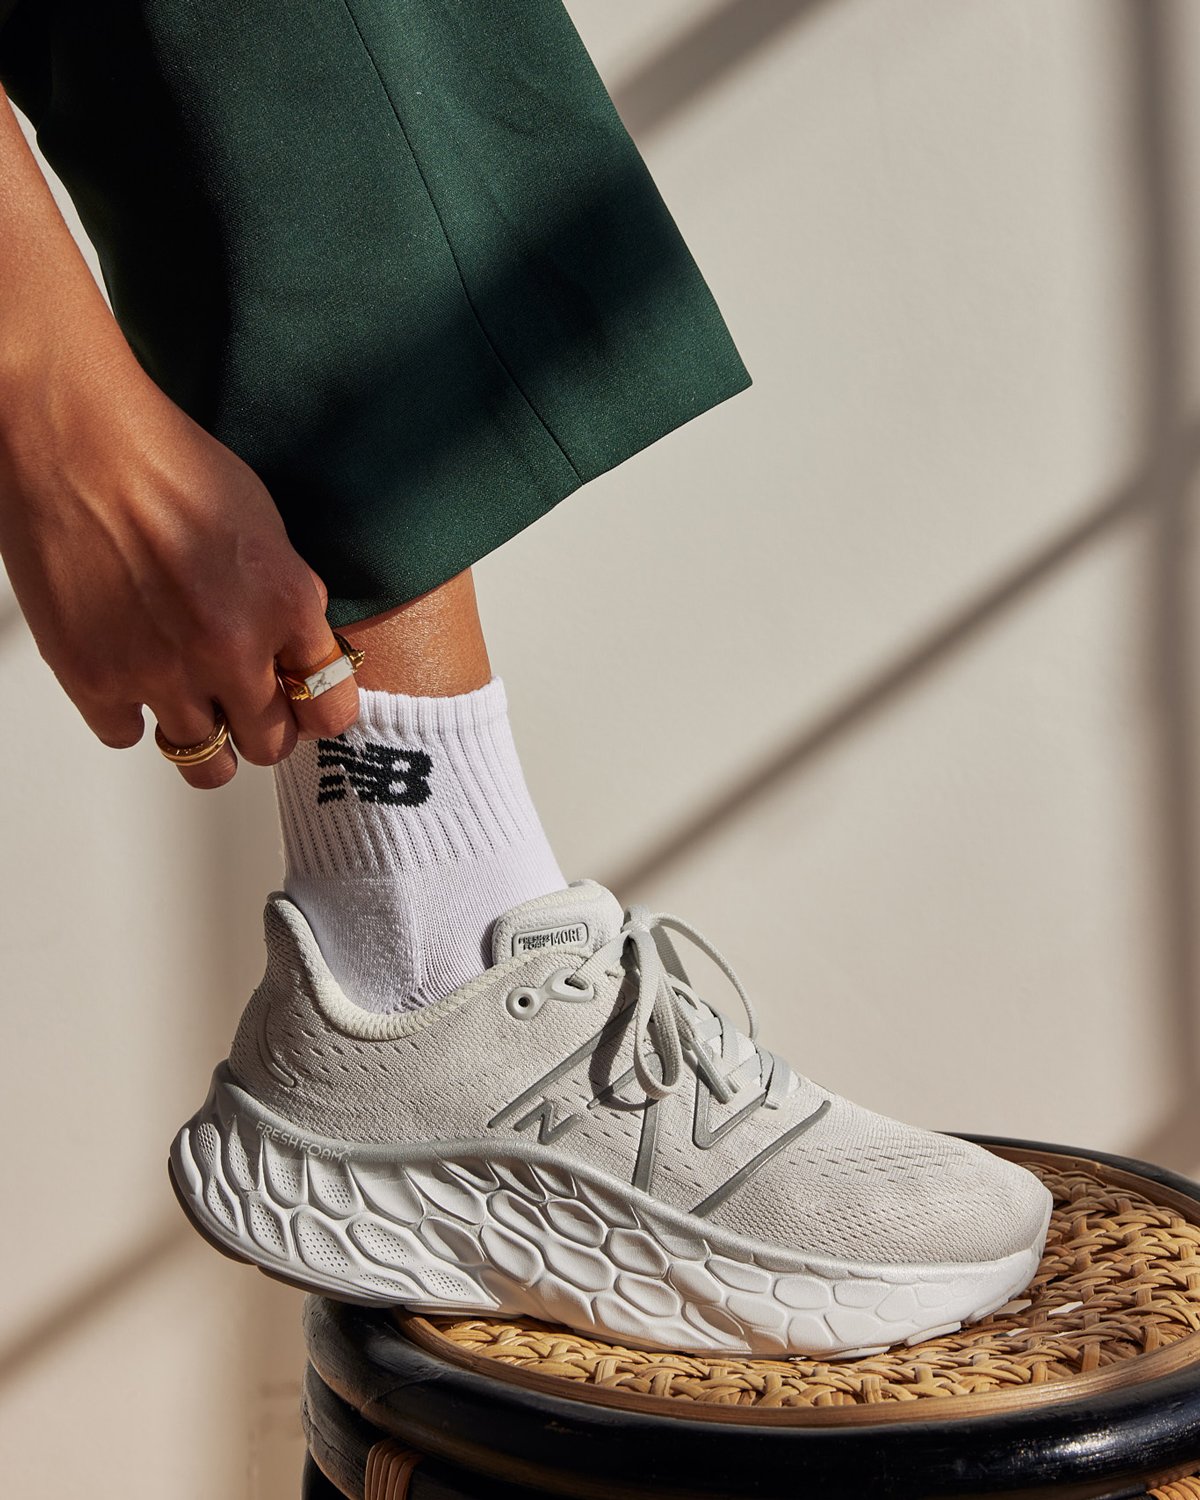 Photo production and sponsored post of the white New Balance Socks and off-white New Balance lifted shoe with laces